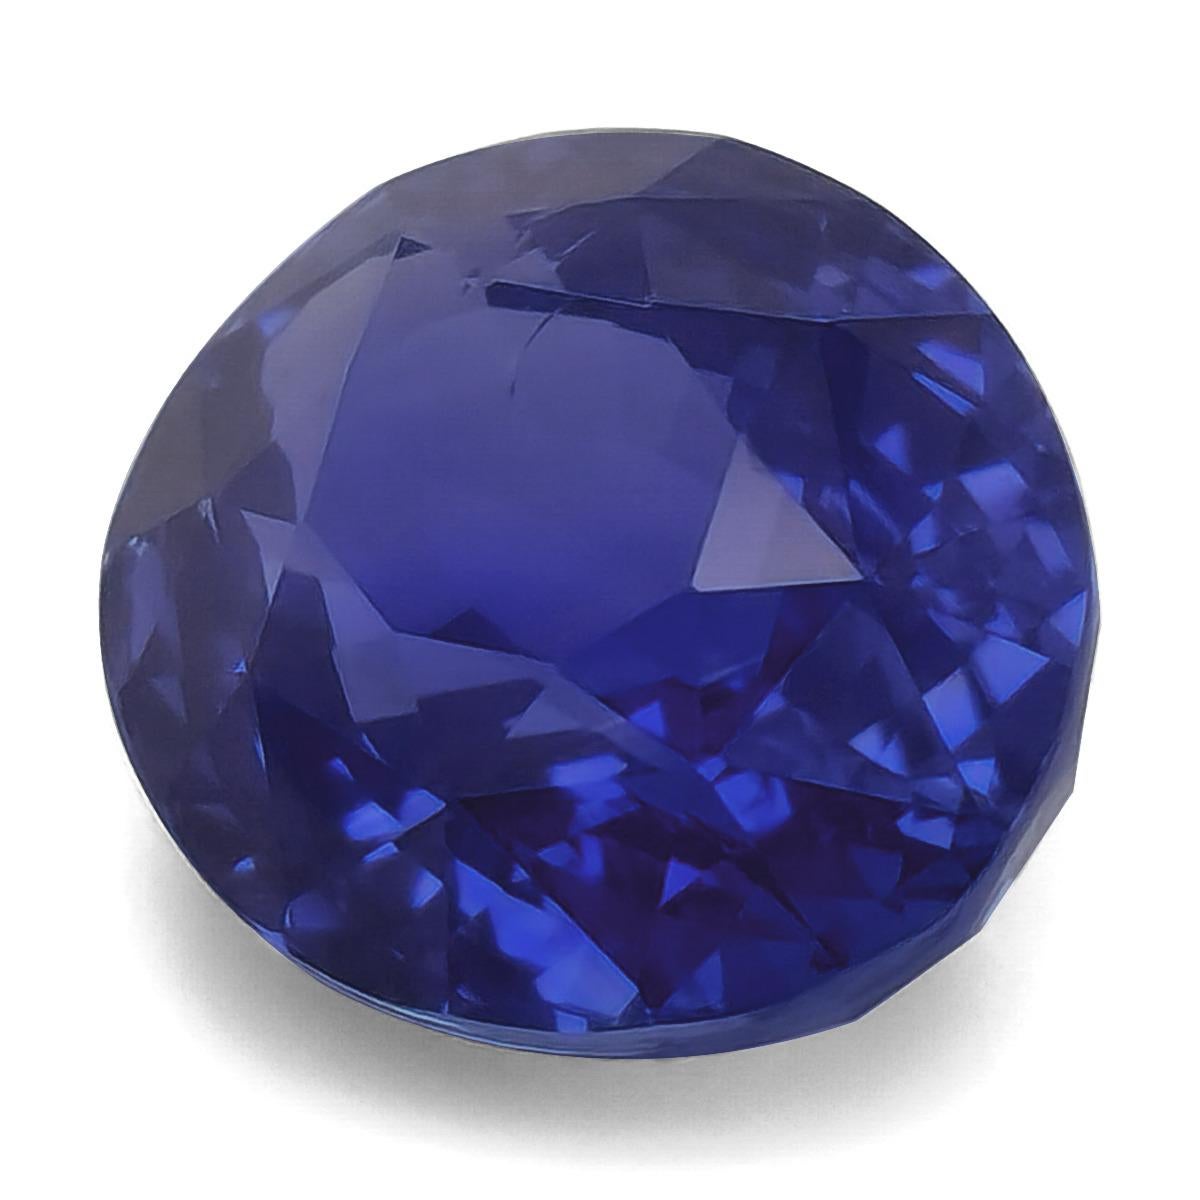 Brilliant Cut GIA Certified 6.06 Carat Natural Unheated Blue Sapphire For Sale